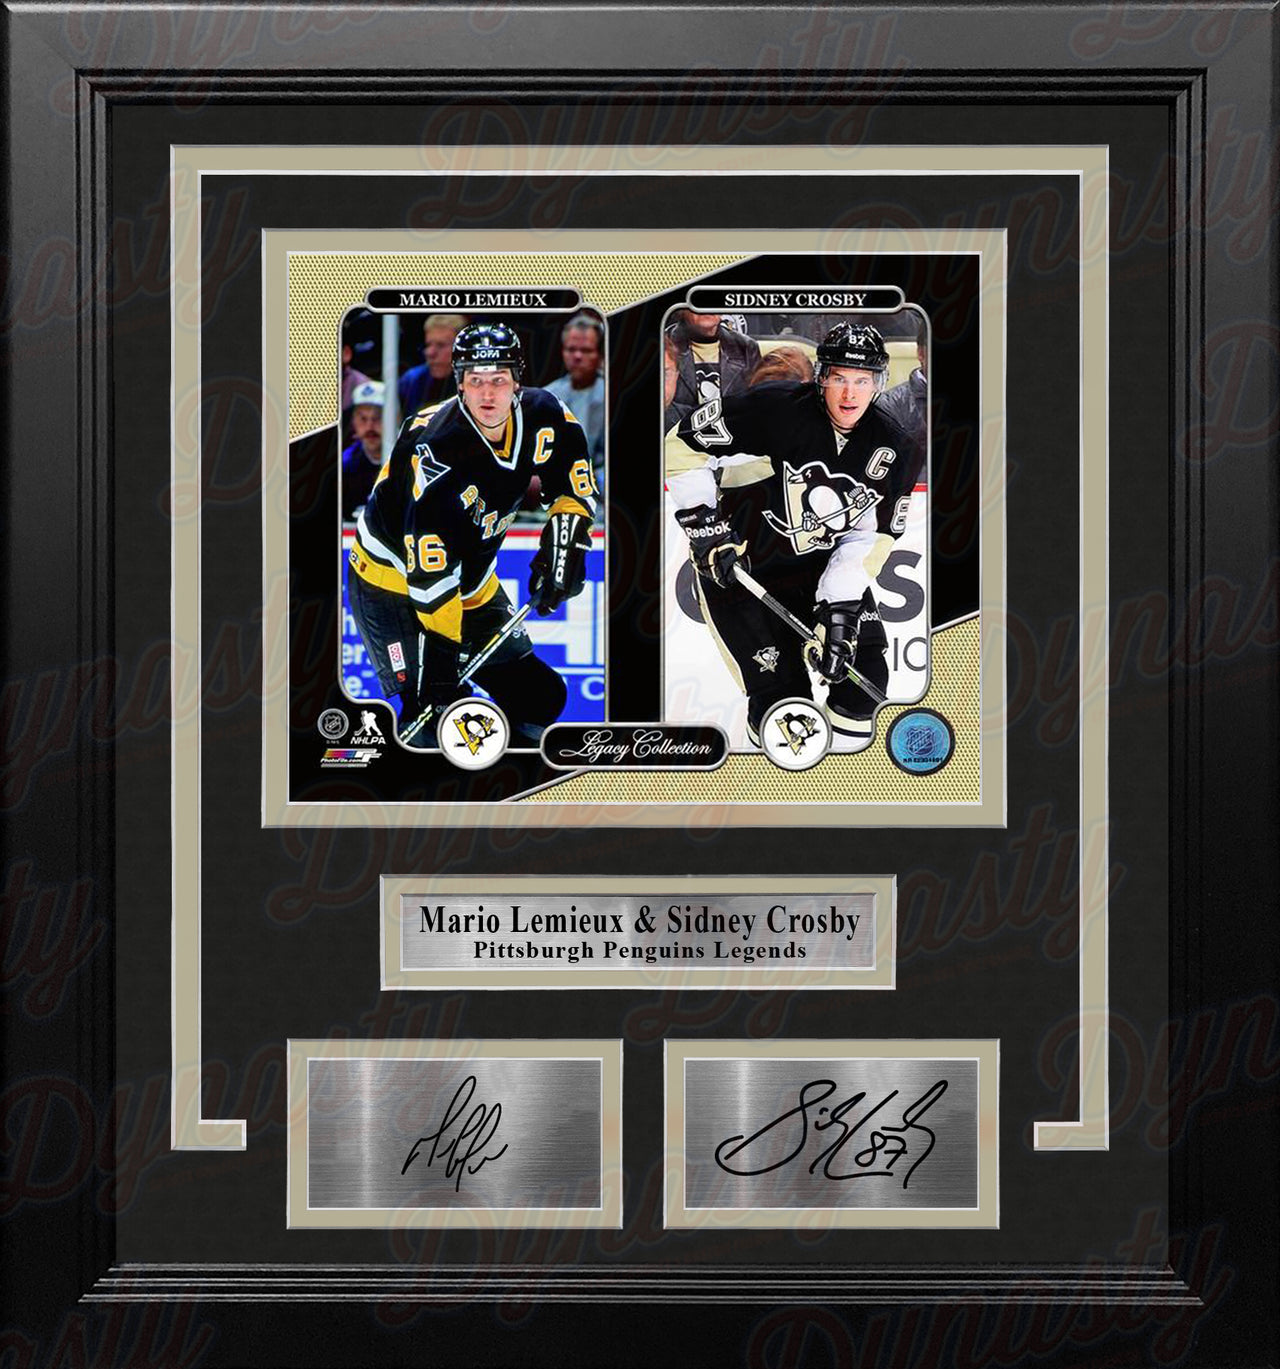 Mario Lemieux & Sidney Crosby Pittsburgh Penguins 8x10 Framed Hockey Photo with Engraved Autographs - Dynasty Sports & Framing 